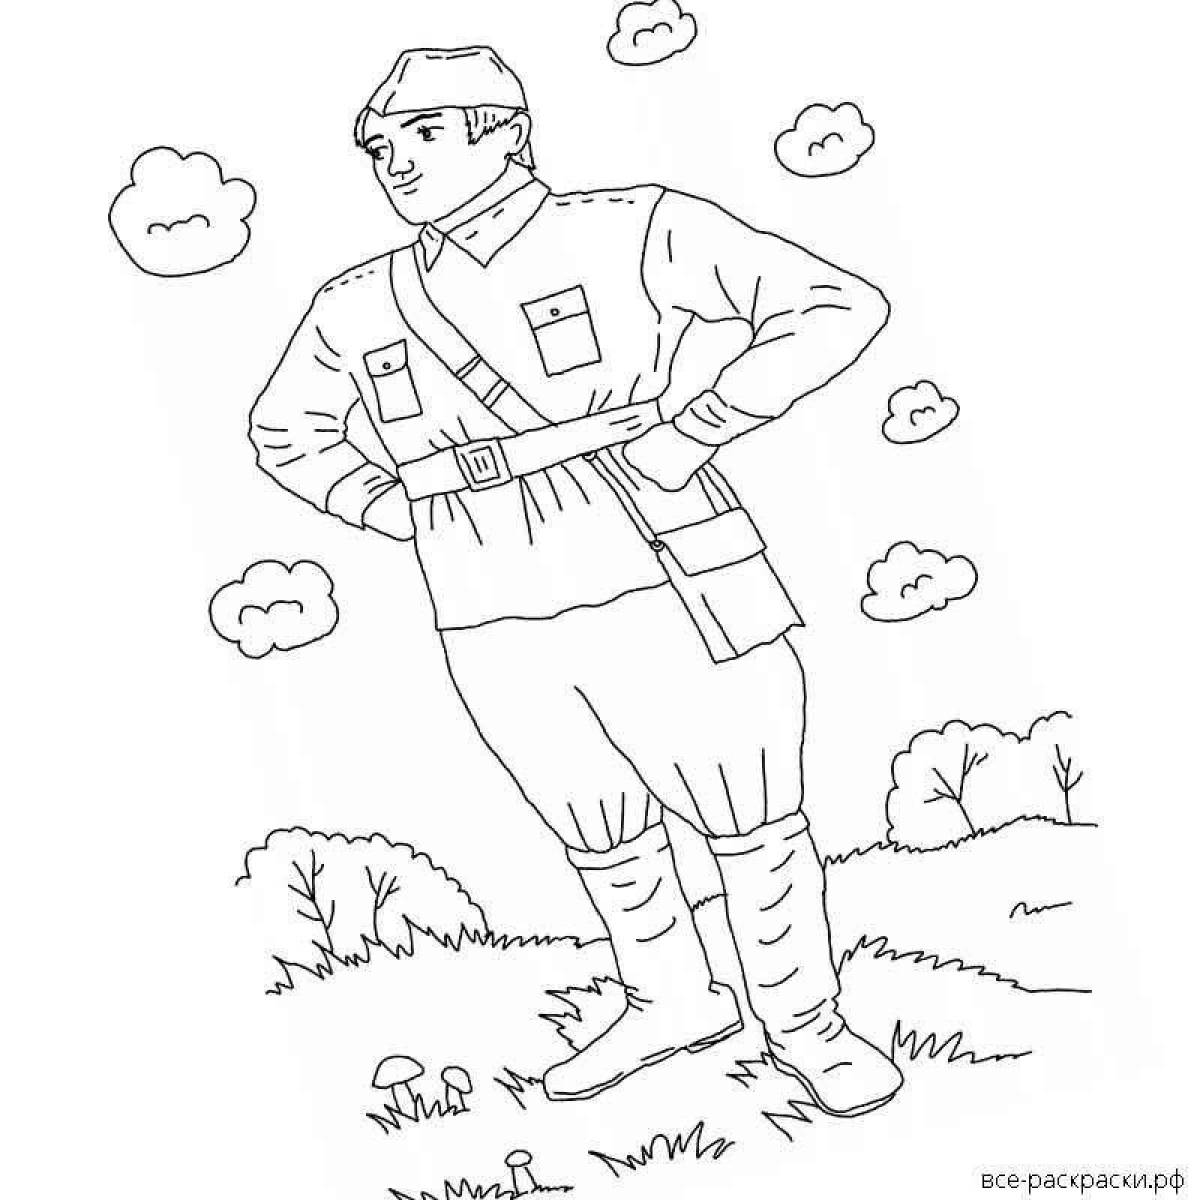 Friendly coloring drawing of a soldier from a schoolboy